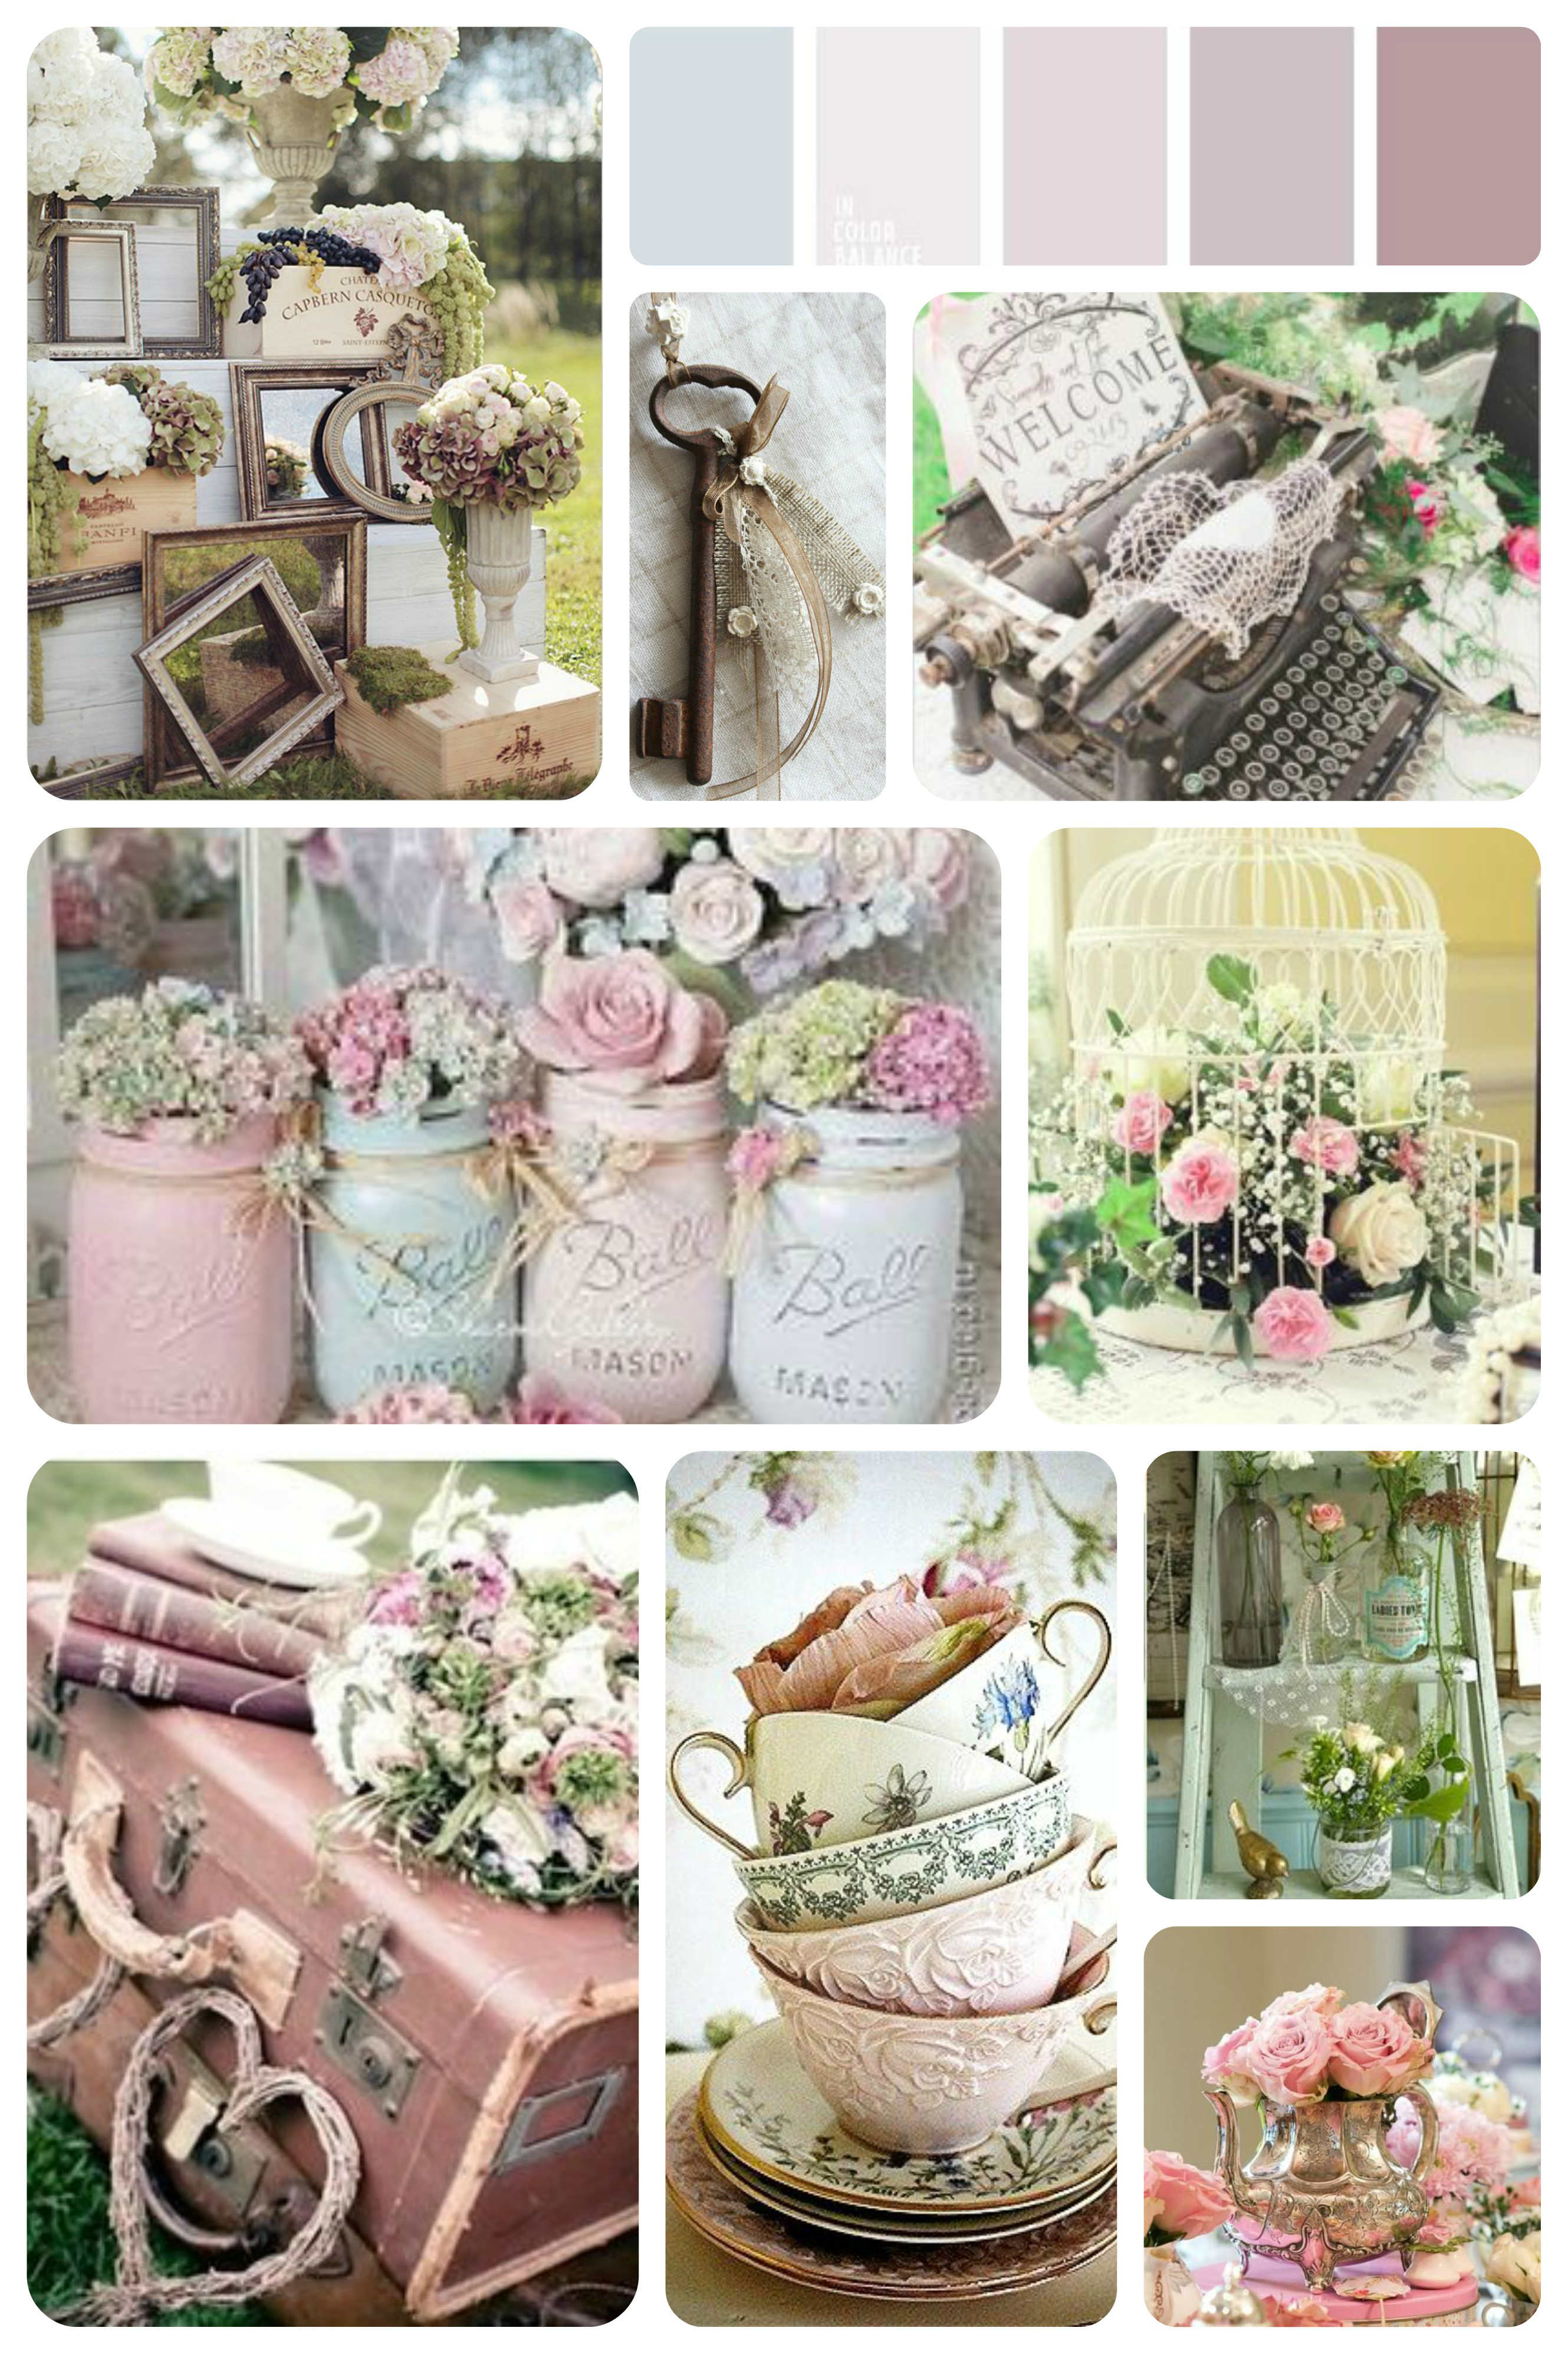 Shabby-chic-style-theme-mariage-idees-tendance-Shabby-decorations-couleurs-ambiance-cest-quoi-Shabby-chic-comment-alexa-reception